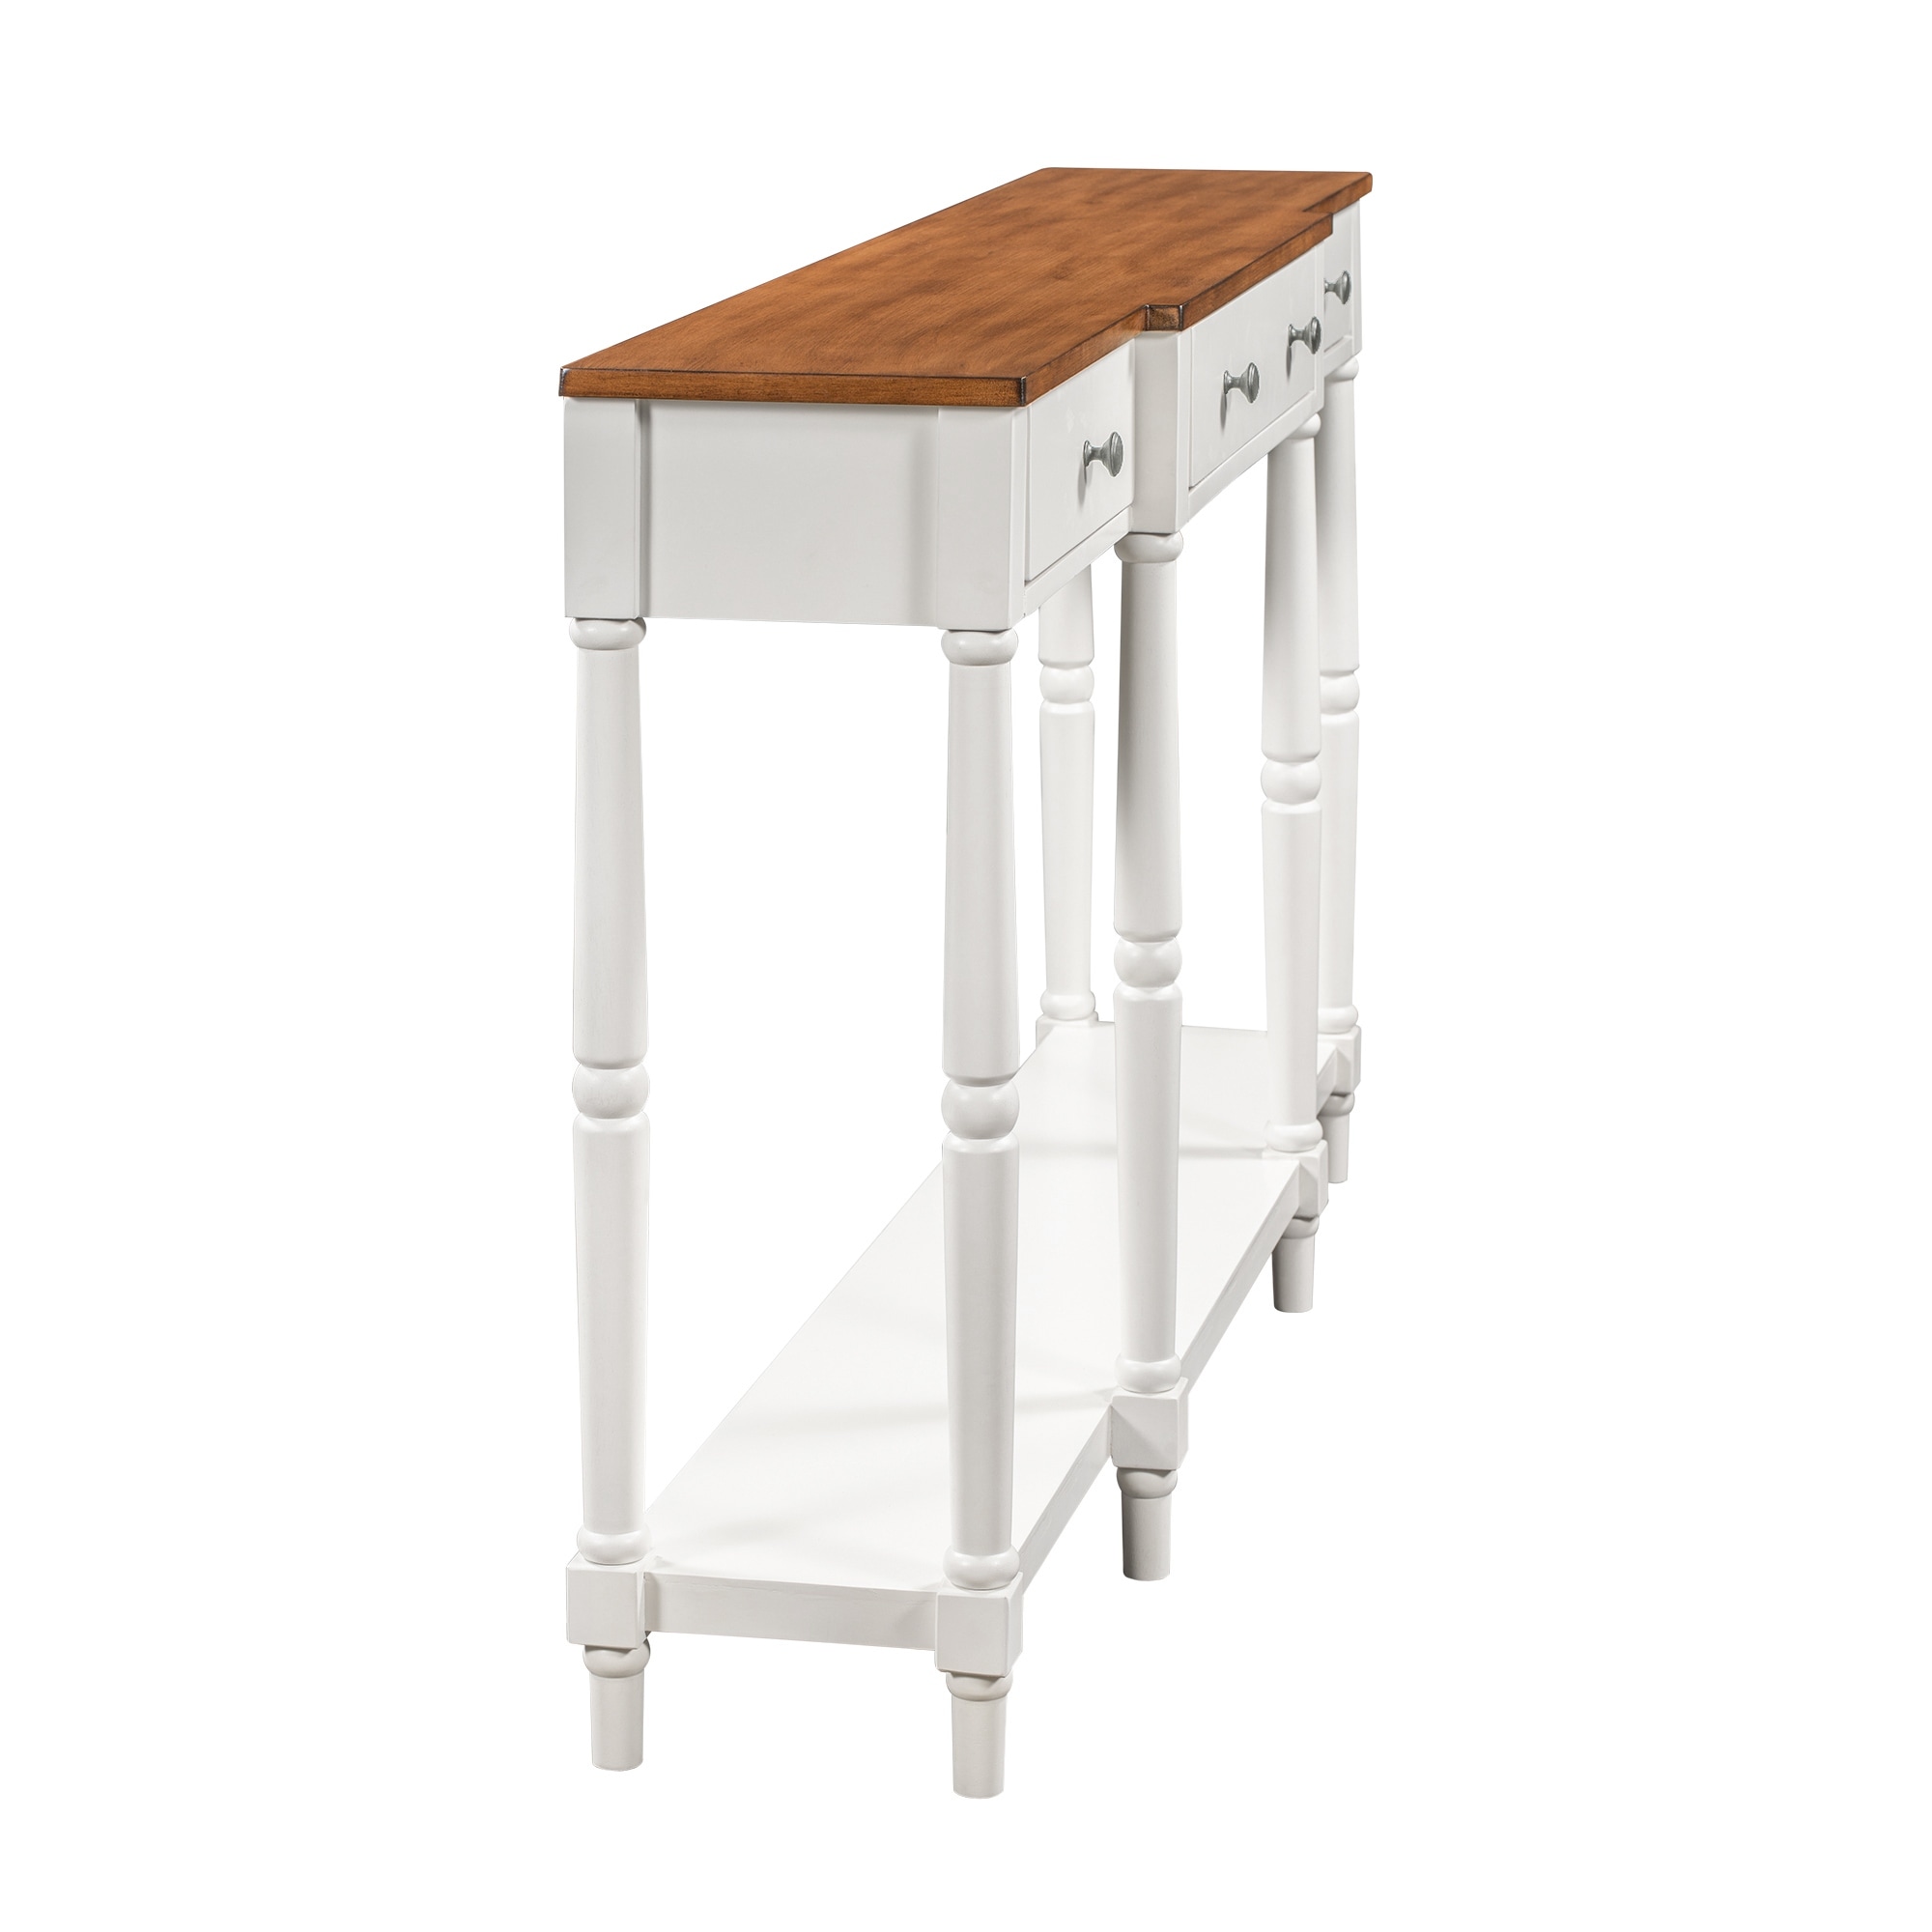 Classic Console Table with 3 Drawers and Bottom Storage Shelf, Solid Wood Sofa Table with Round Knobs for Entryway